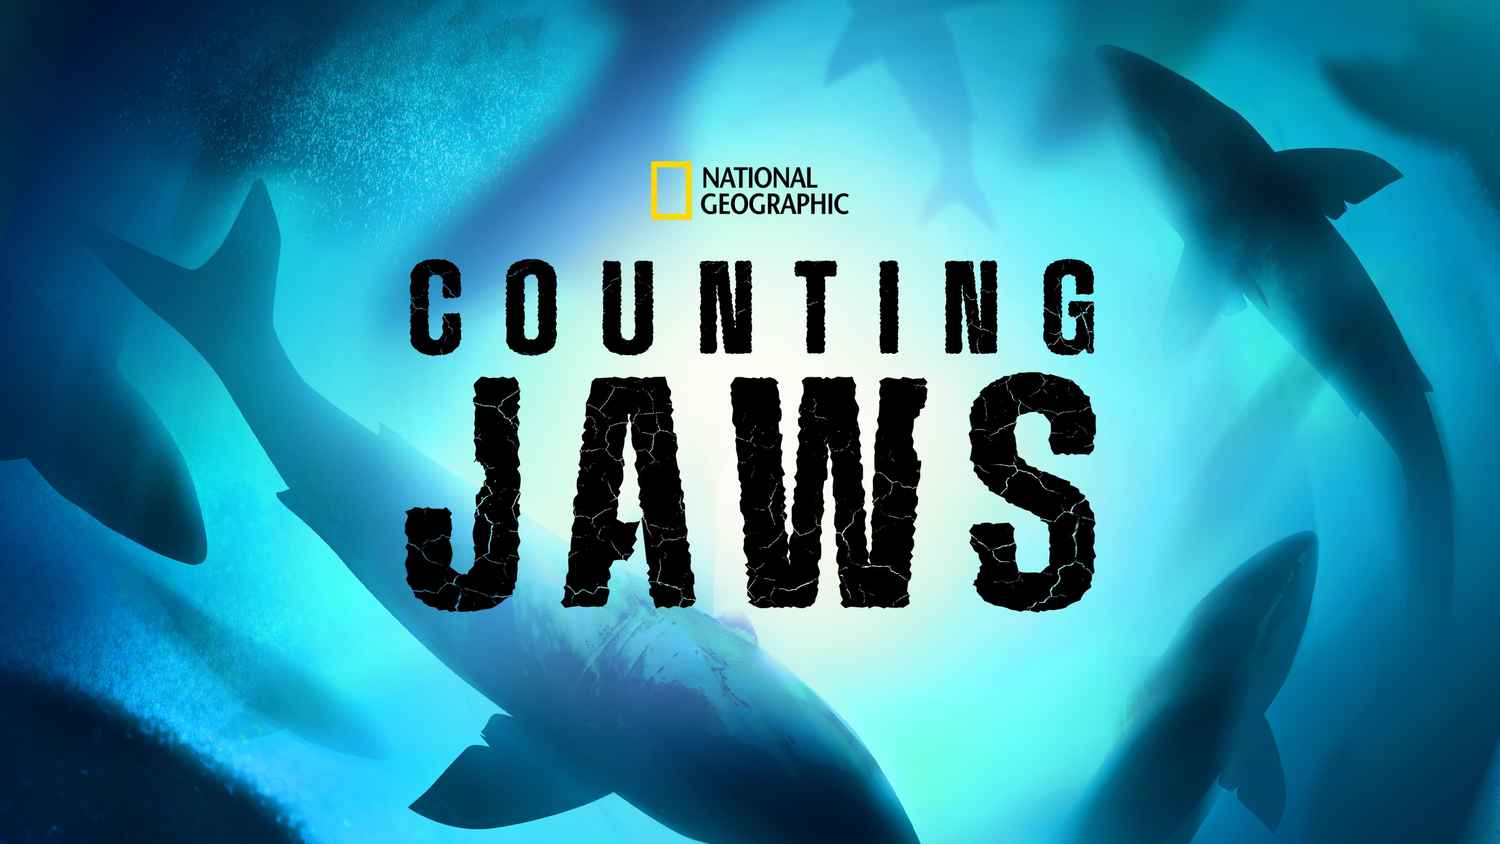 Counting Jaws